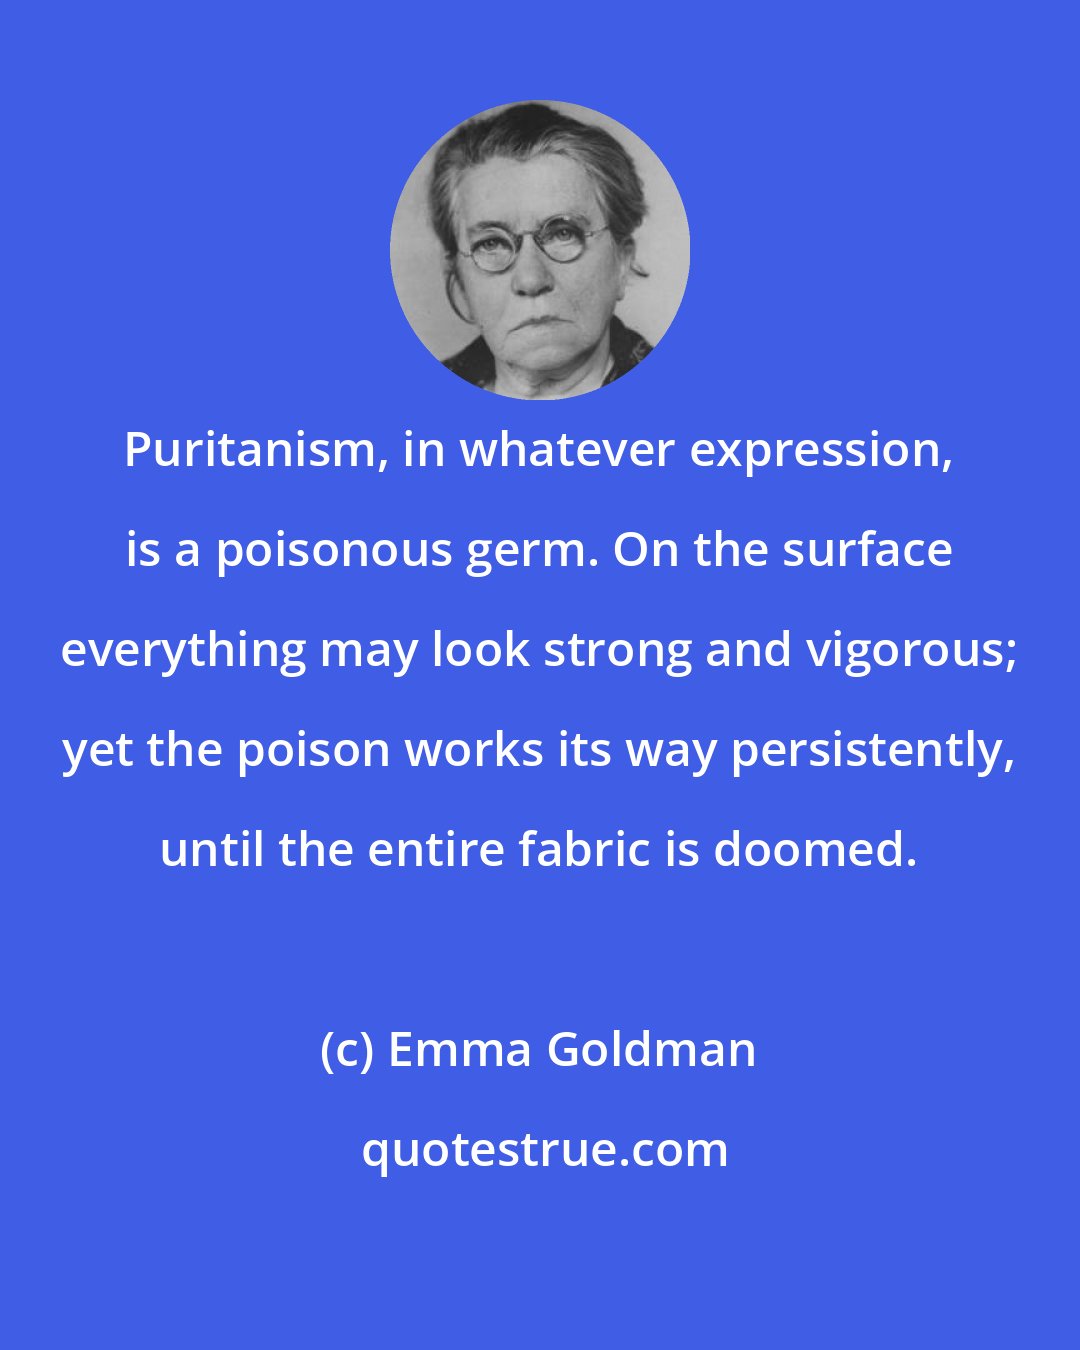 Emma Goldman: Puritanism, in whatever expression, is a poisonous germ. On the surface everything may look strong and vigorous; yet the poison works its way persistently, until the entire fabric is doomed.